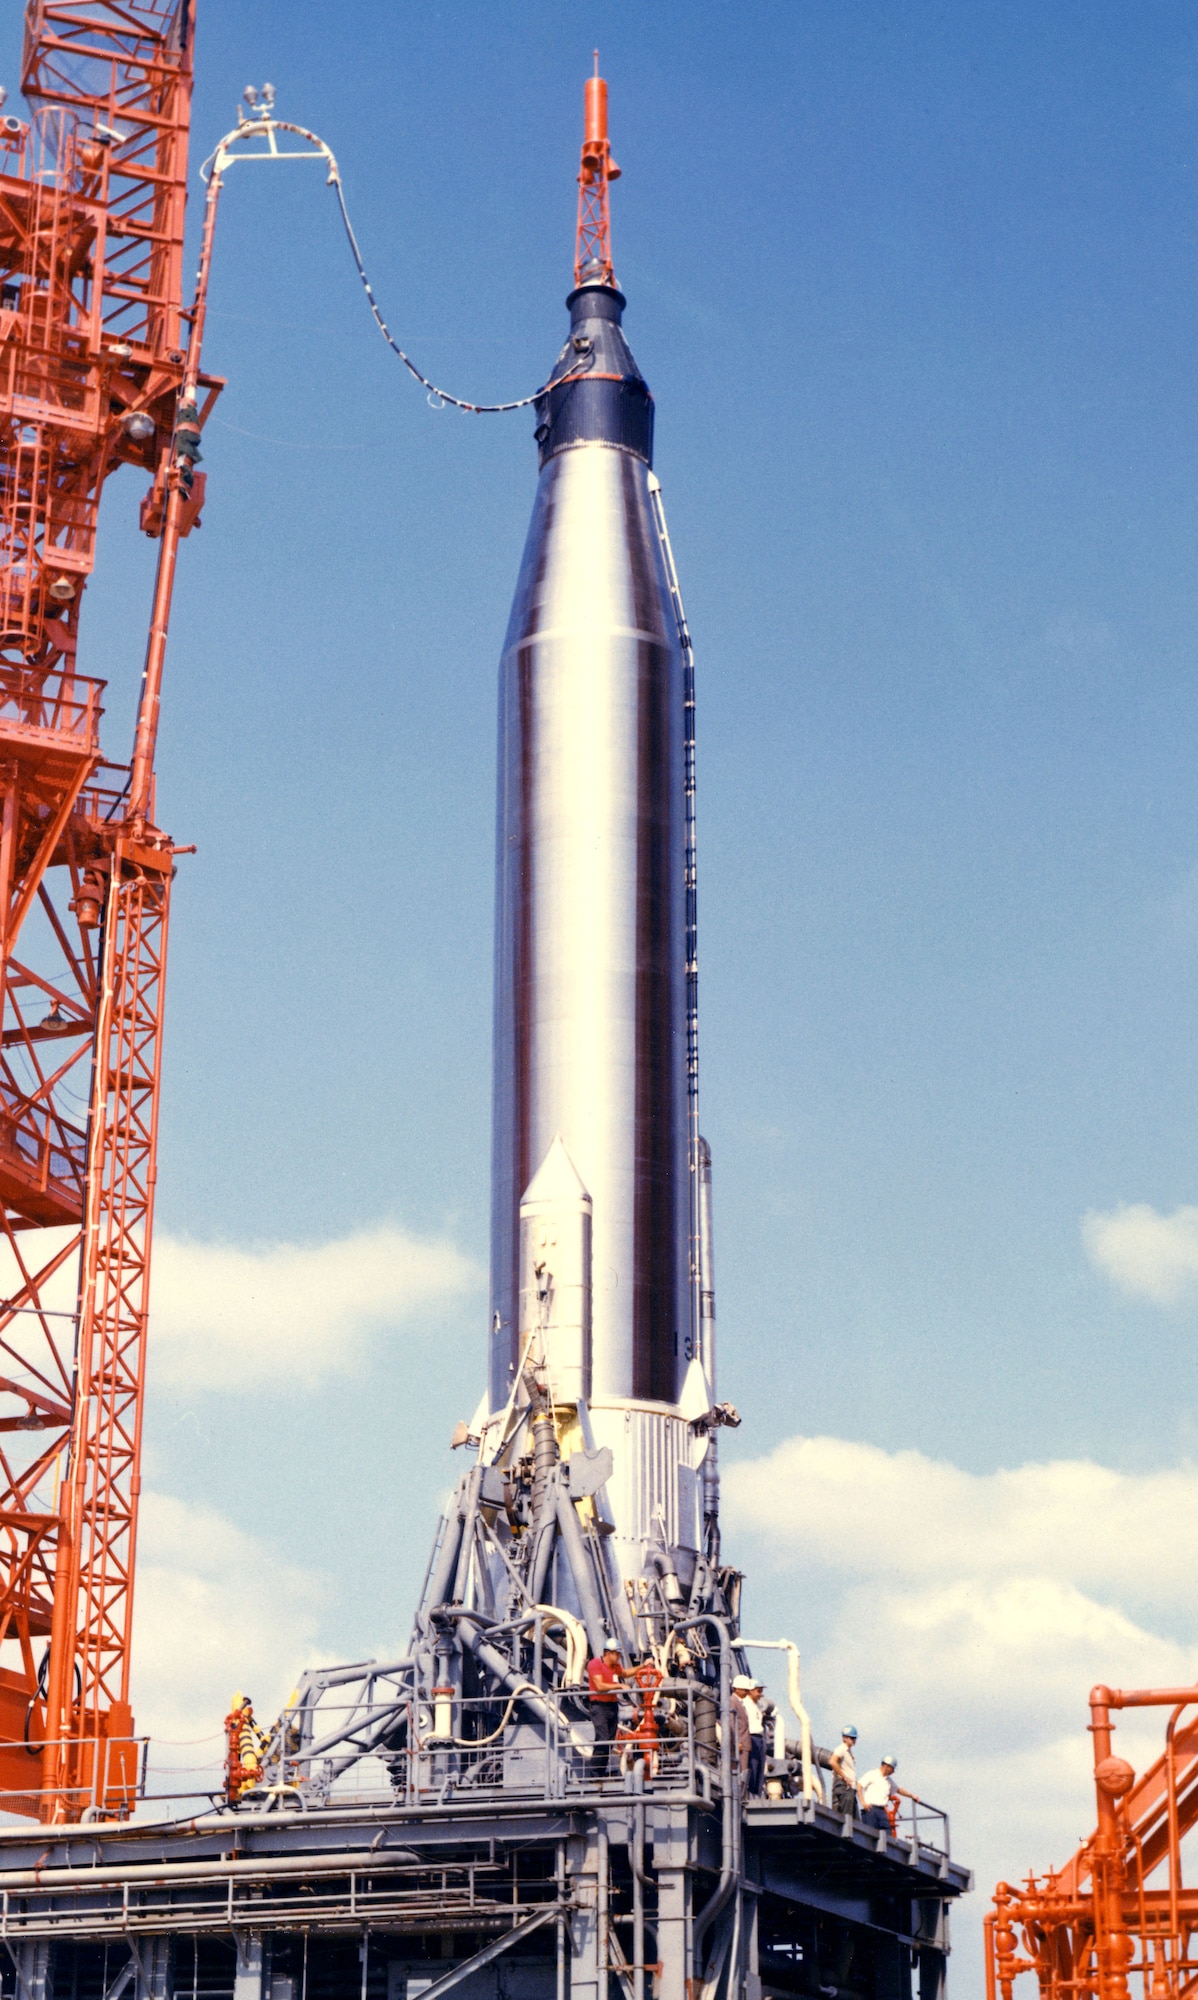 The Air Force's Atlas booster, a modified intercontinental ballistic missile, was used in all four orbital Mercury flights. This May 1963 photo shows Mercury Atlas 9 awaiting launch. (U.S. Air Force photo)